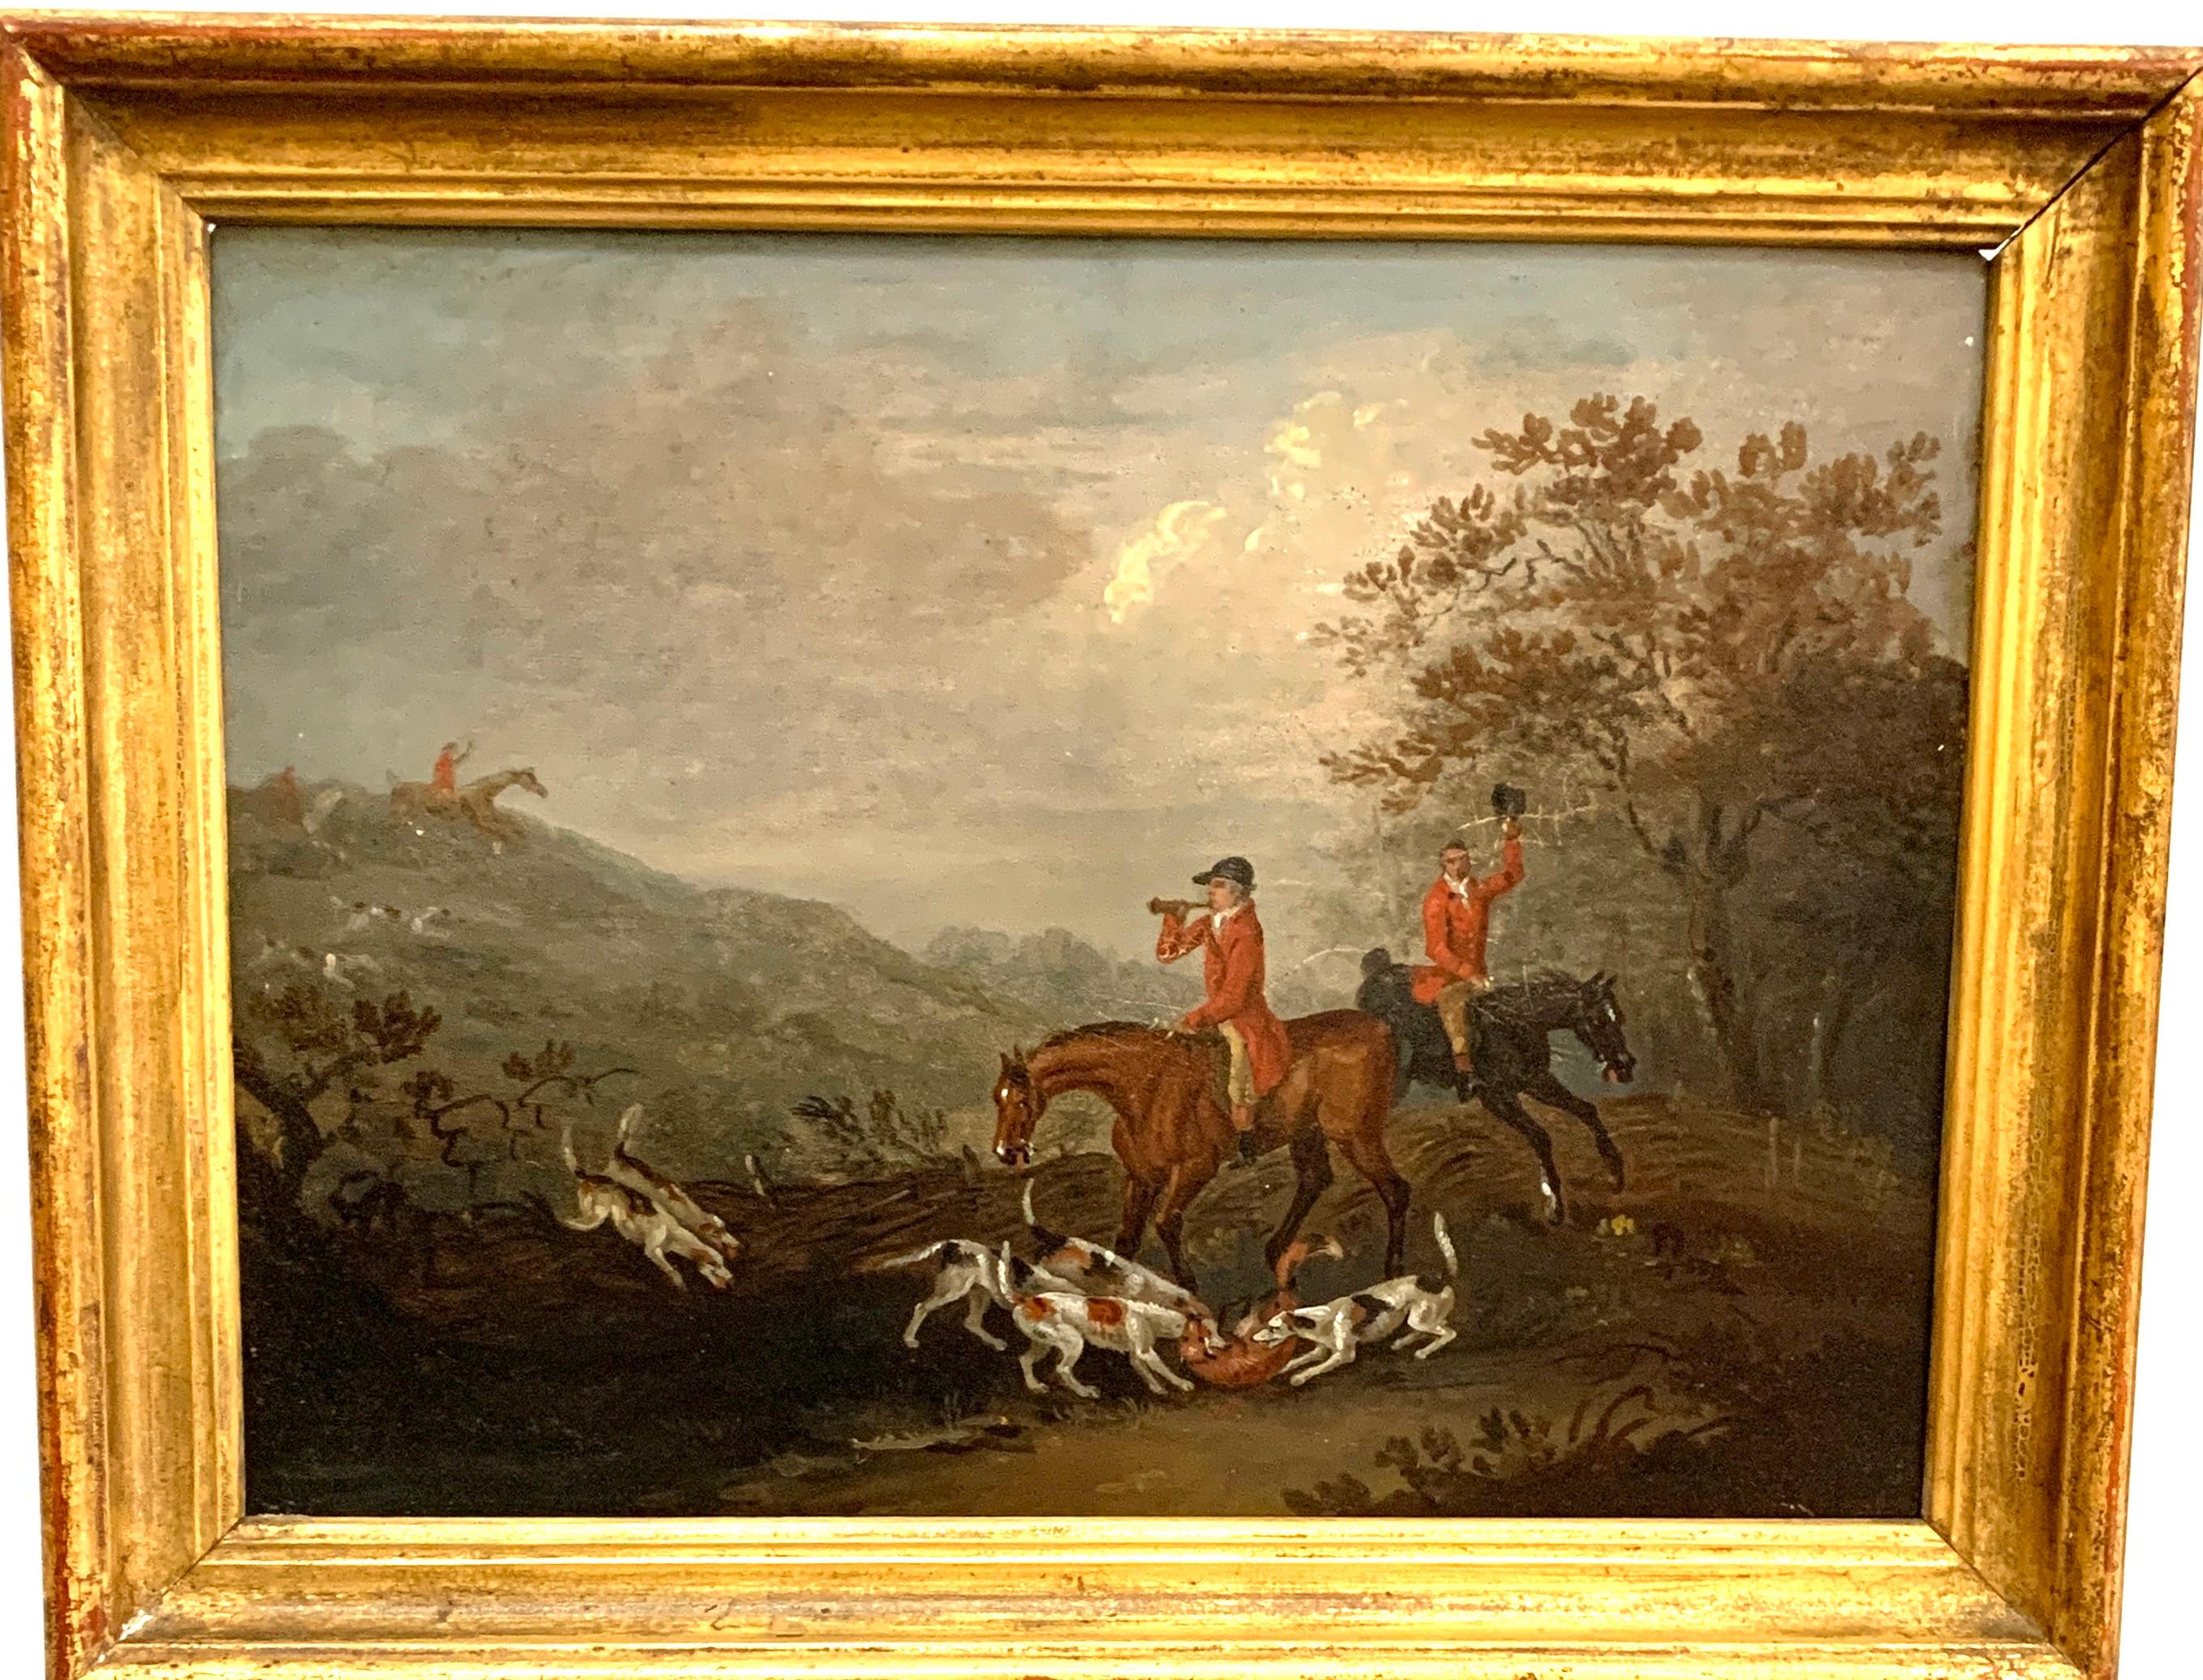 Set of 4 early 19th century Fox hunting landscape with men in red upon horseback.

John Nost Sartorius (1755-1828) was an English painter of horses, horse racing, and hunting scenes. He is considered the best known and most prolific of the Sartorius